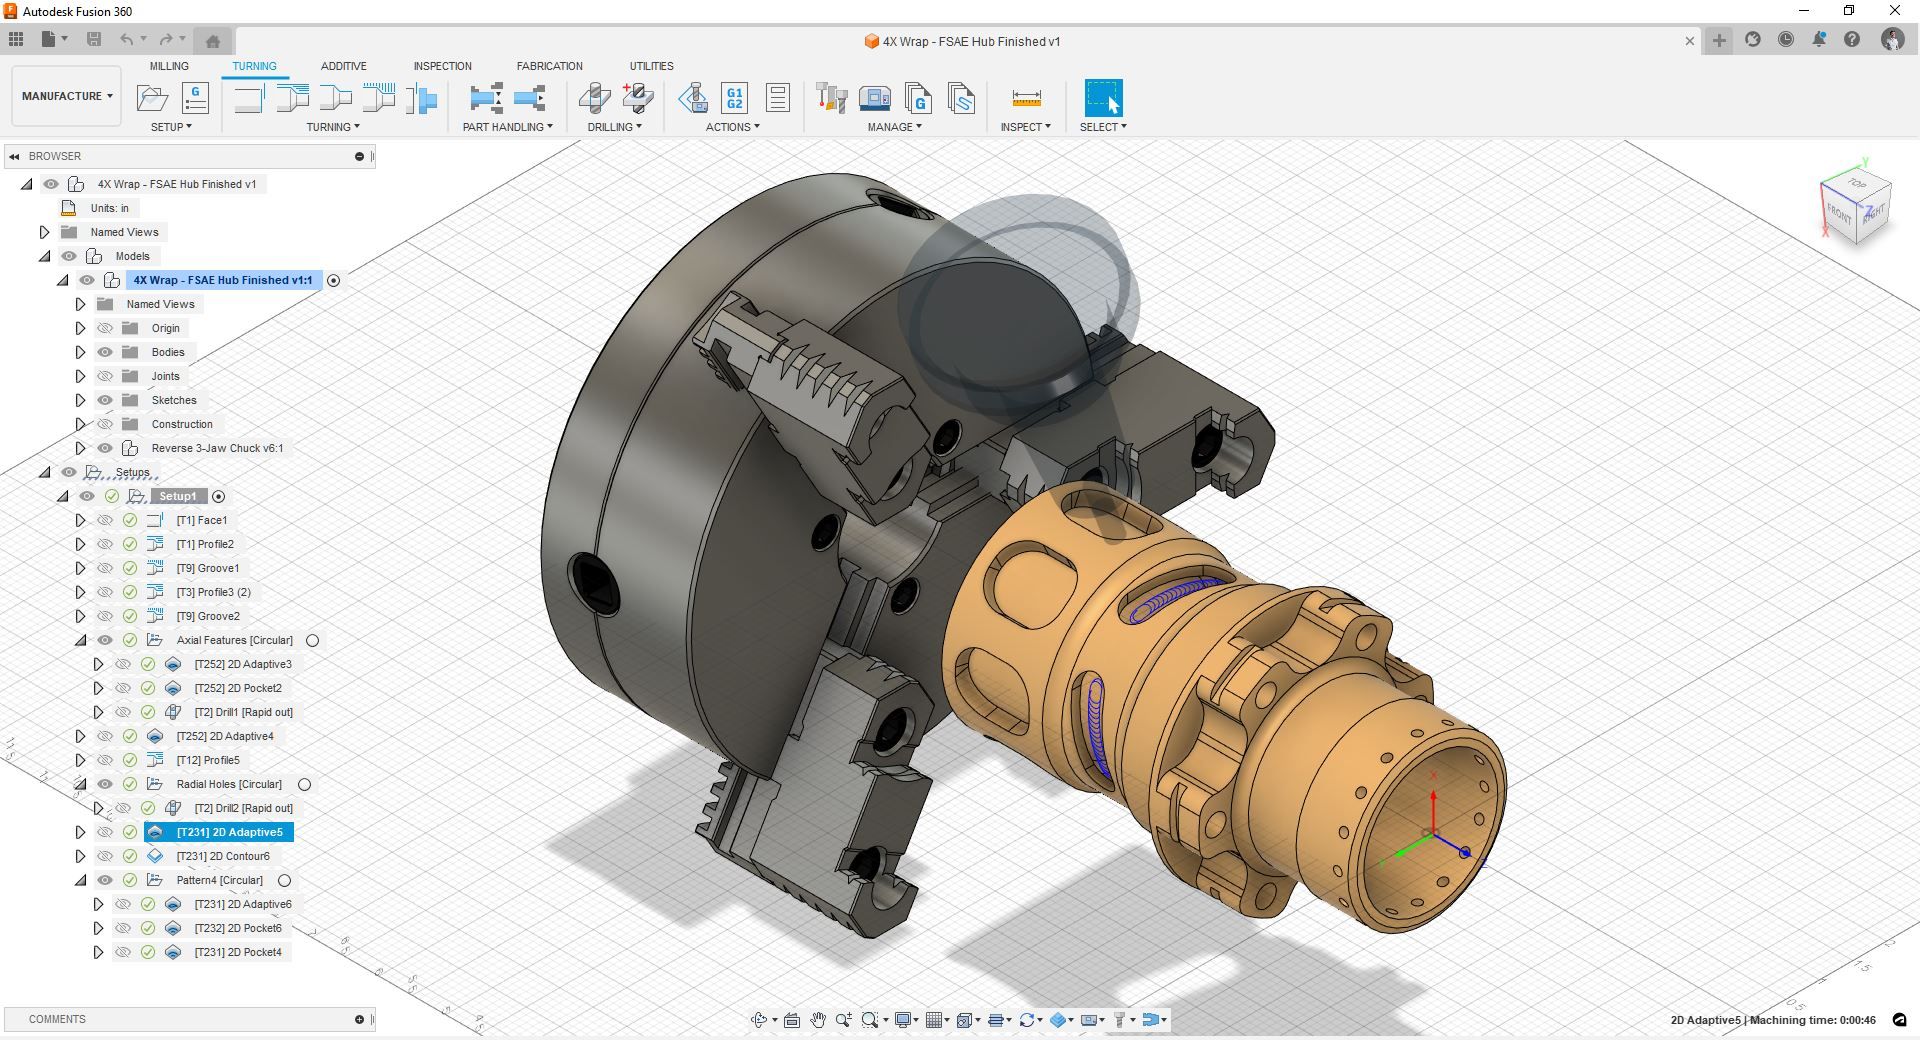 Screenshot of Autodesk Fusion 360's integrated CAD/CAM functionality